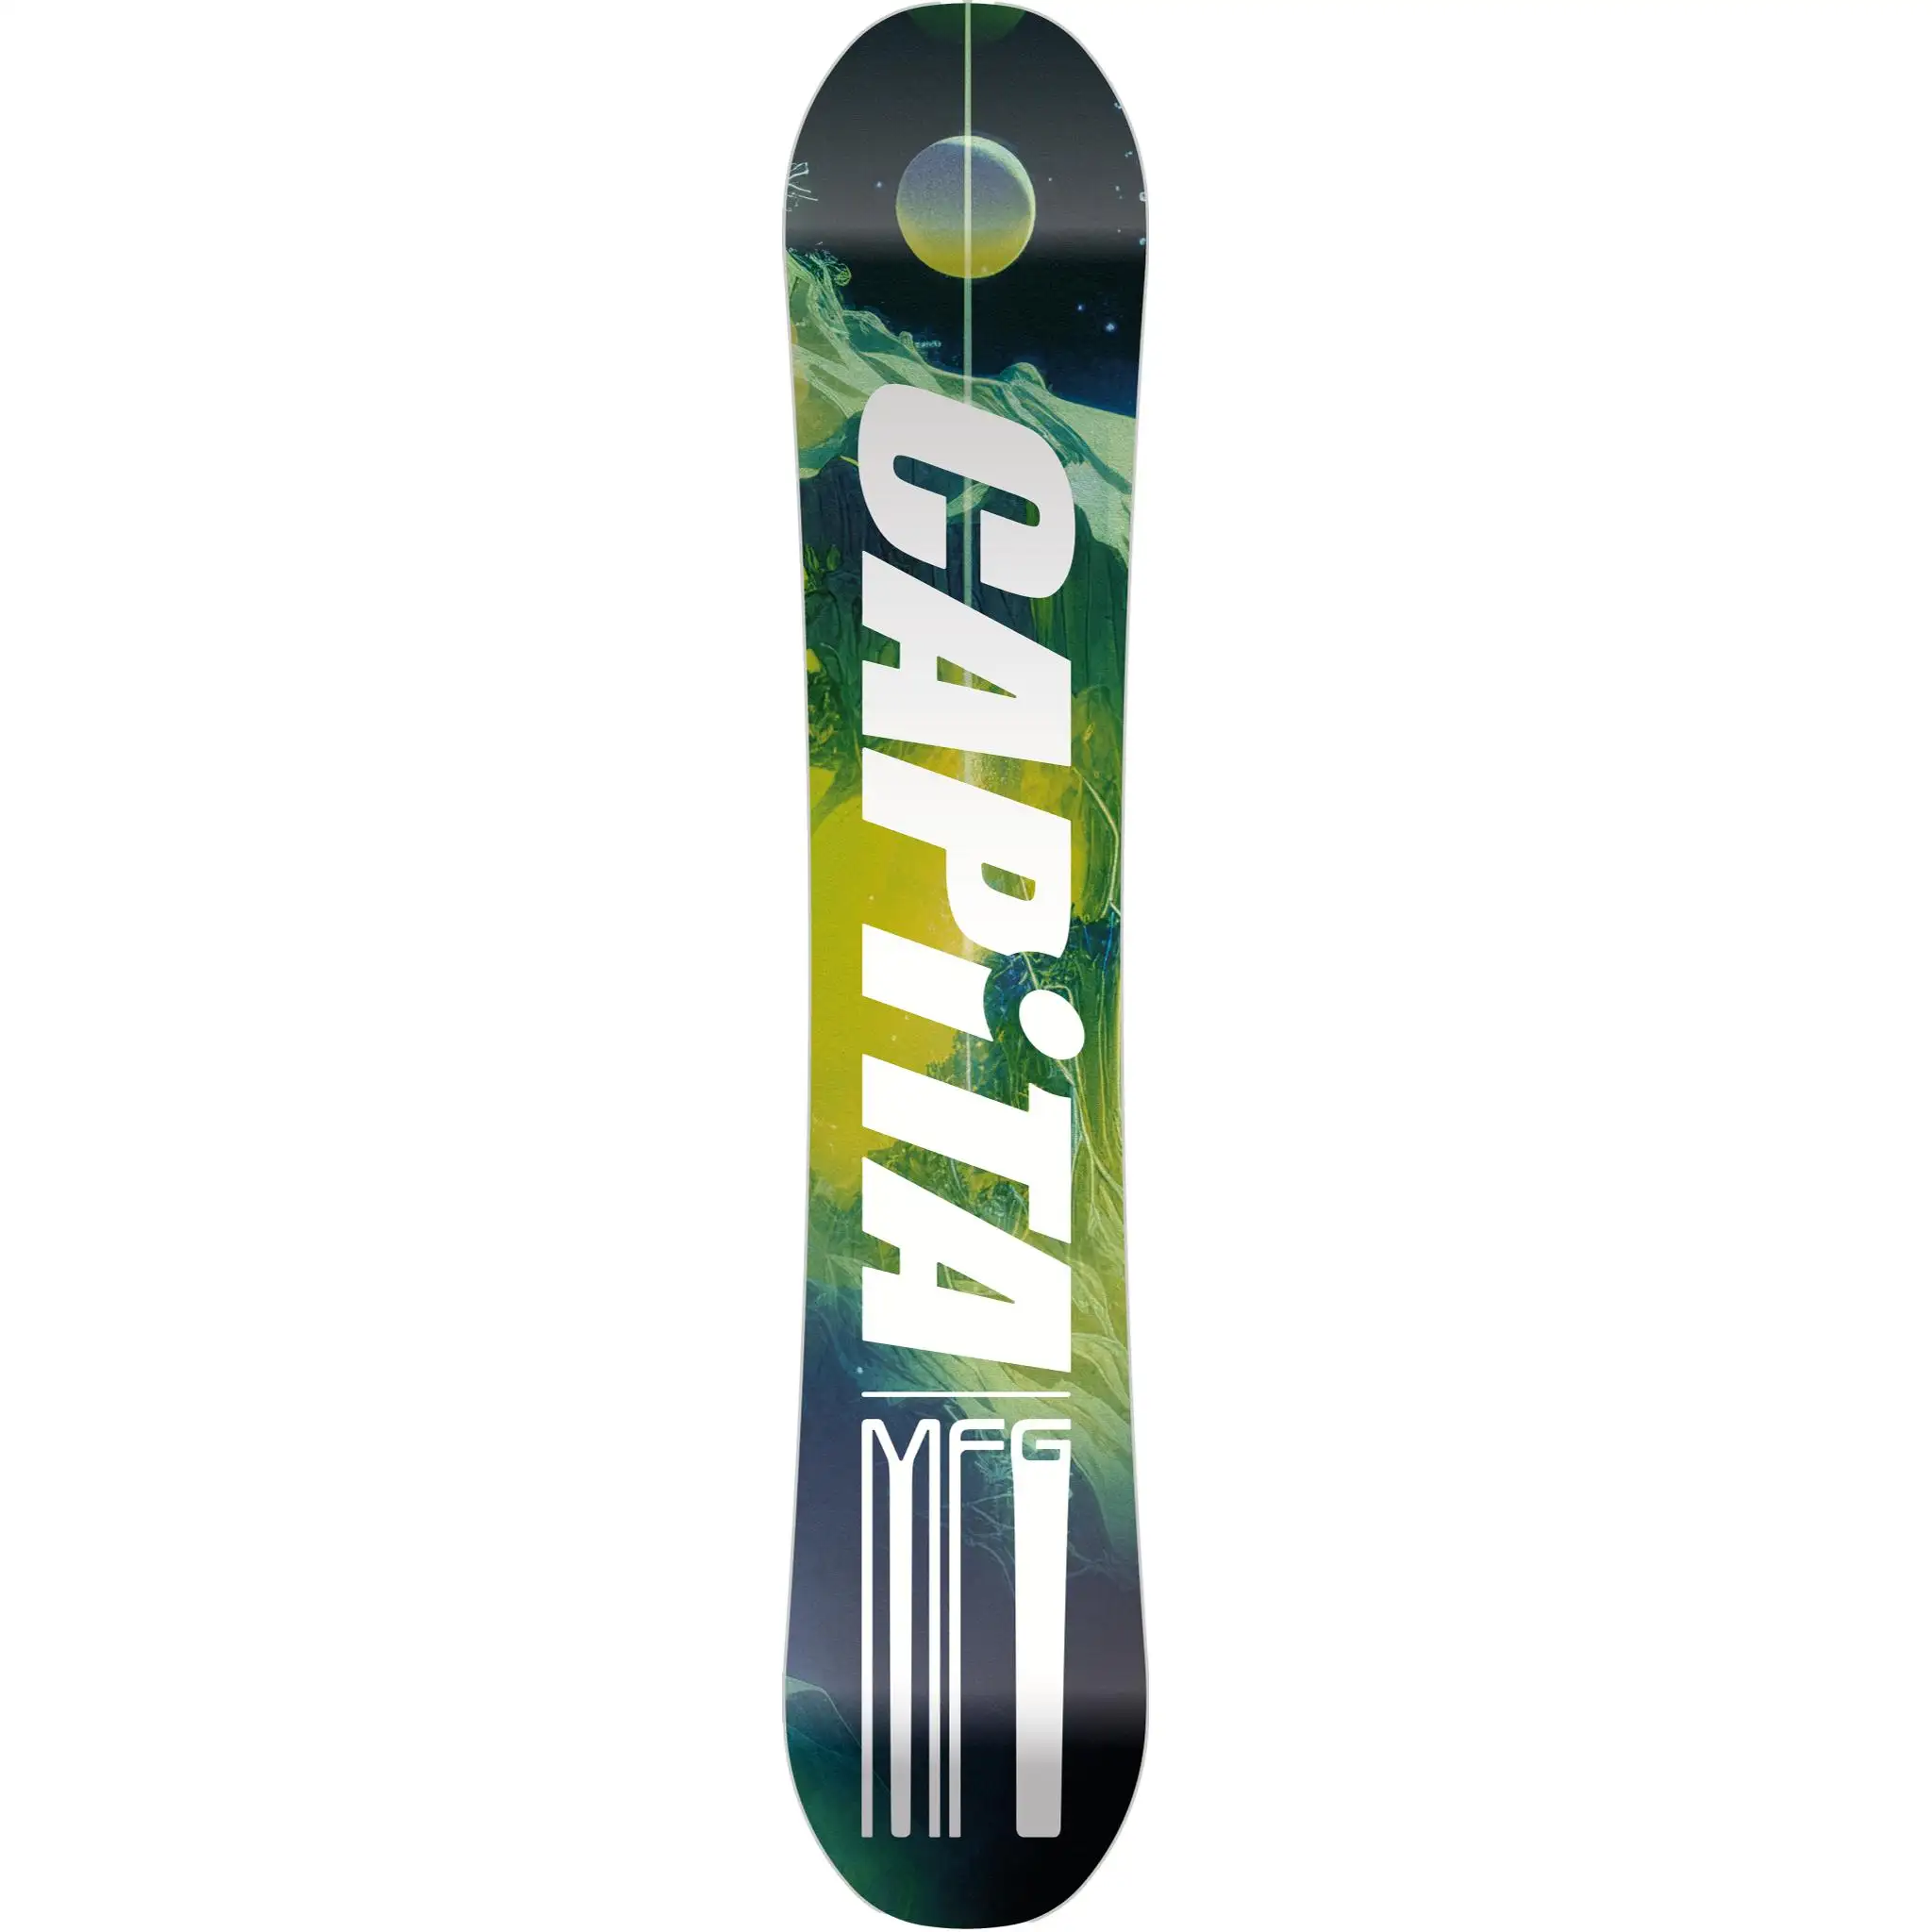 CAPITA OUTERSPACE LIVING 156 SNOWBOARD